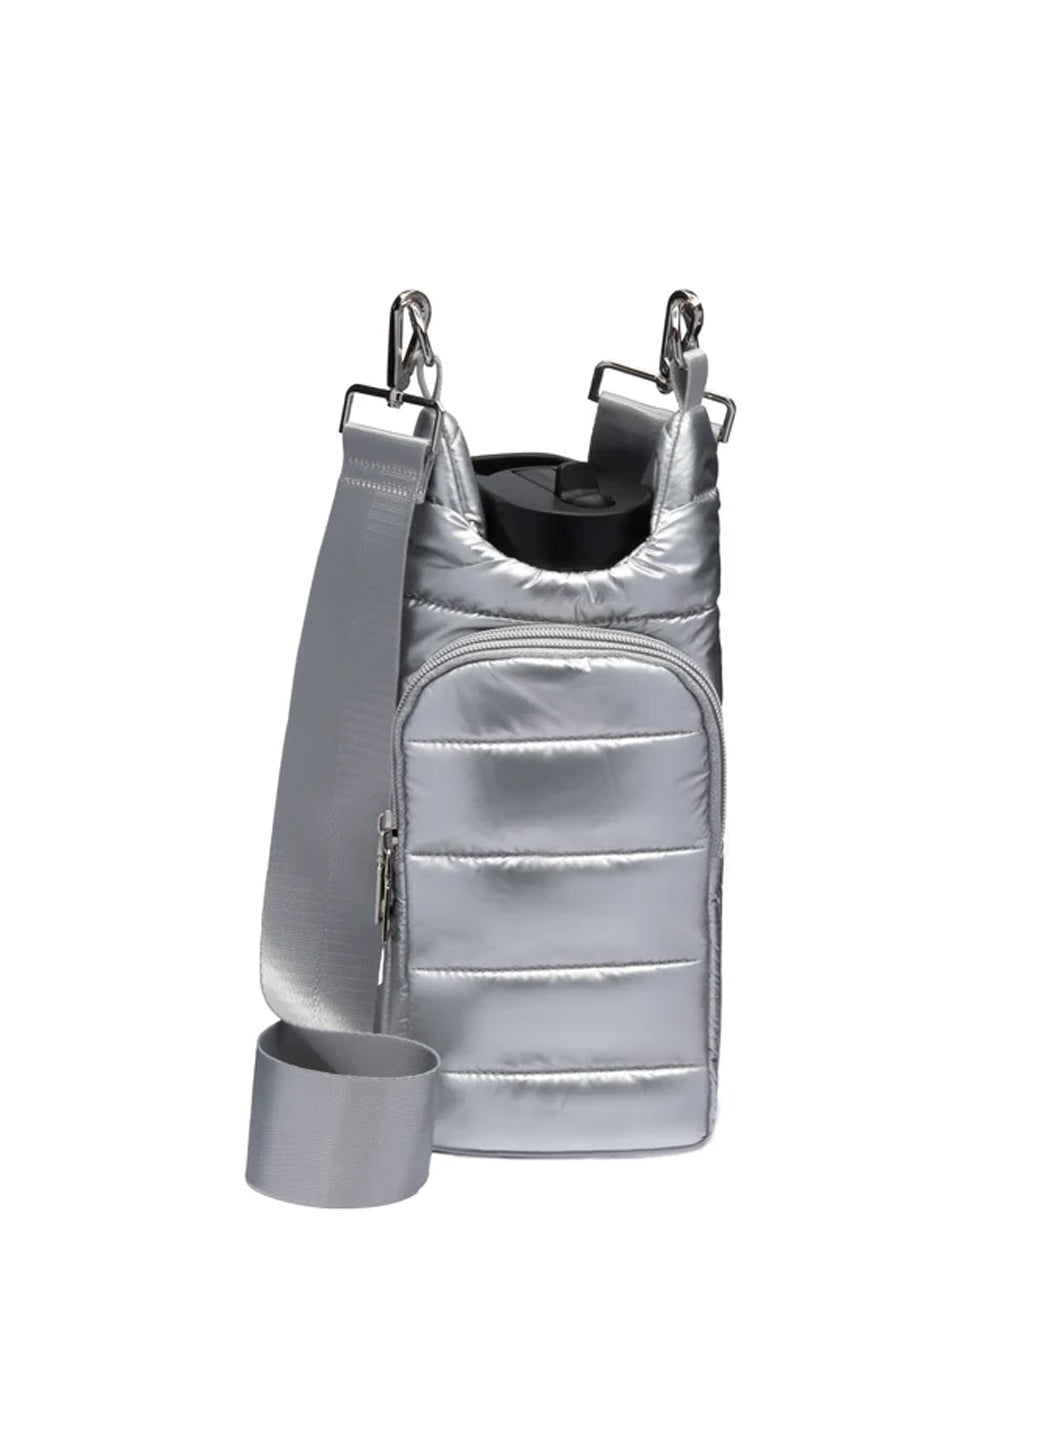 WanderFull Silver Metallic HydroBag with Interchangeable Solid Silver Strap